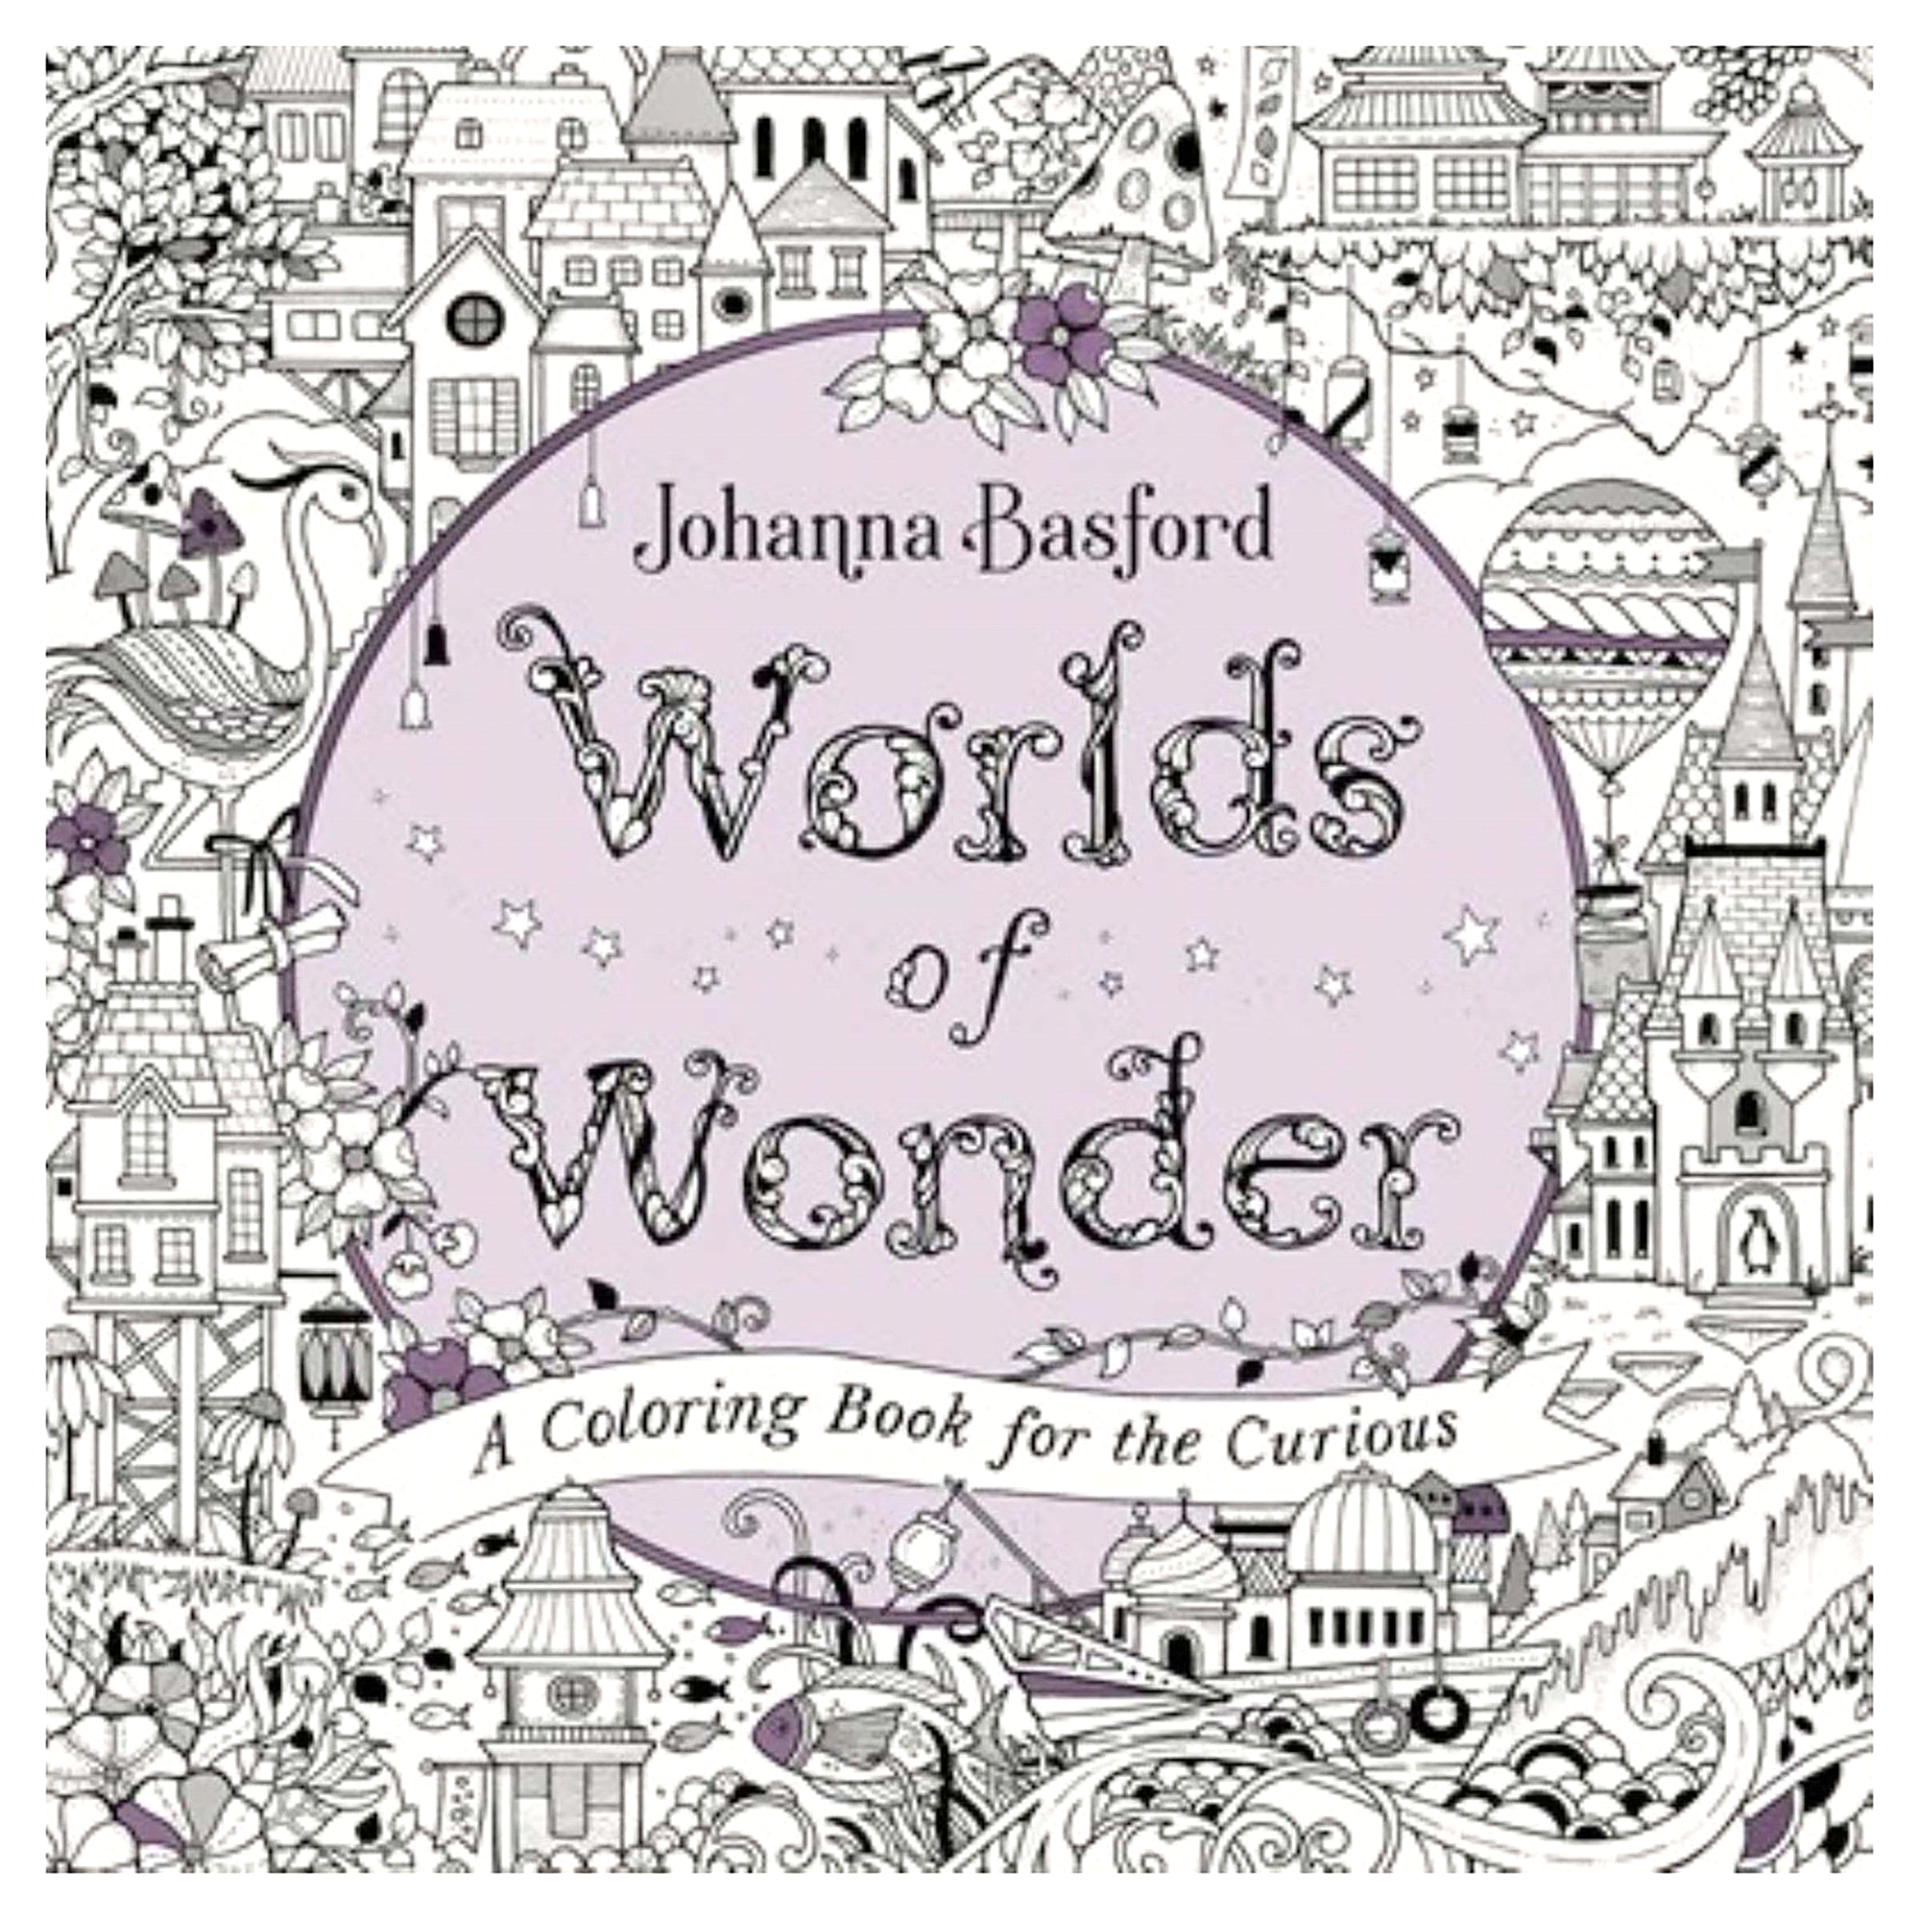 Worlds of Wonder : A Coloring Book for the Curious by Johanna Basford